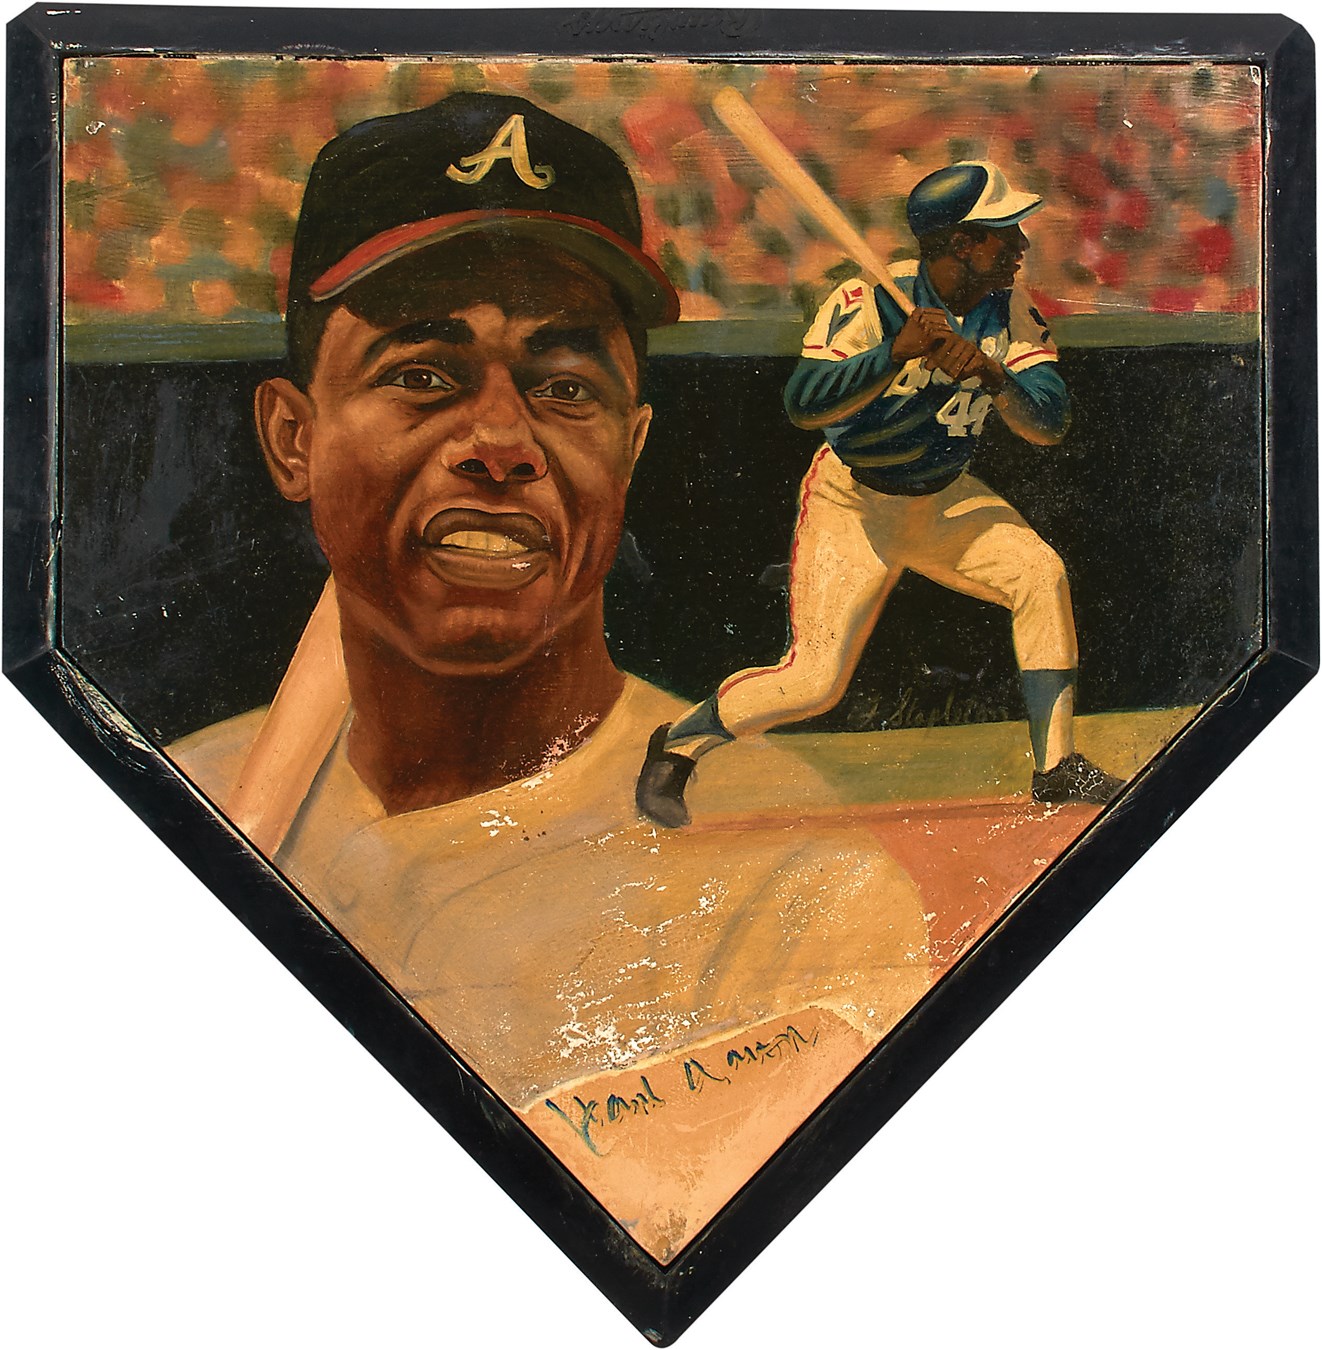 Hank Aaron Signed Oil Painting on Home Plate by Frank Stapleton (JSA)